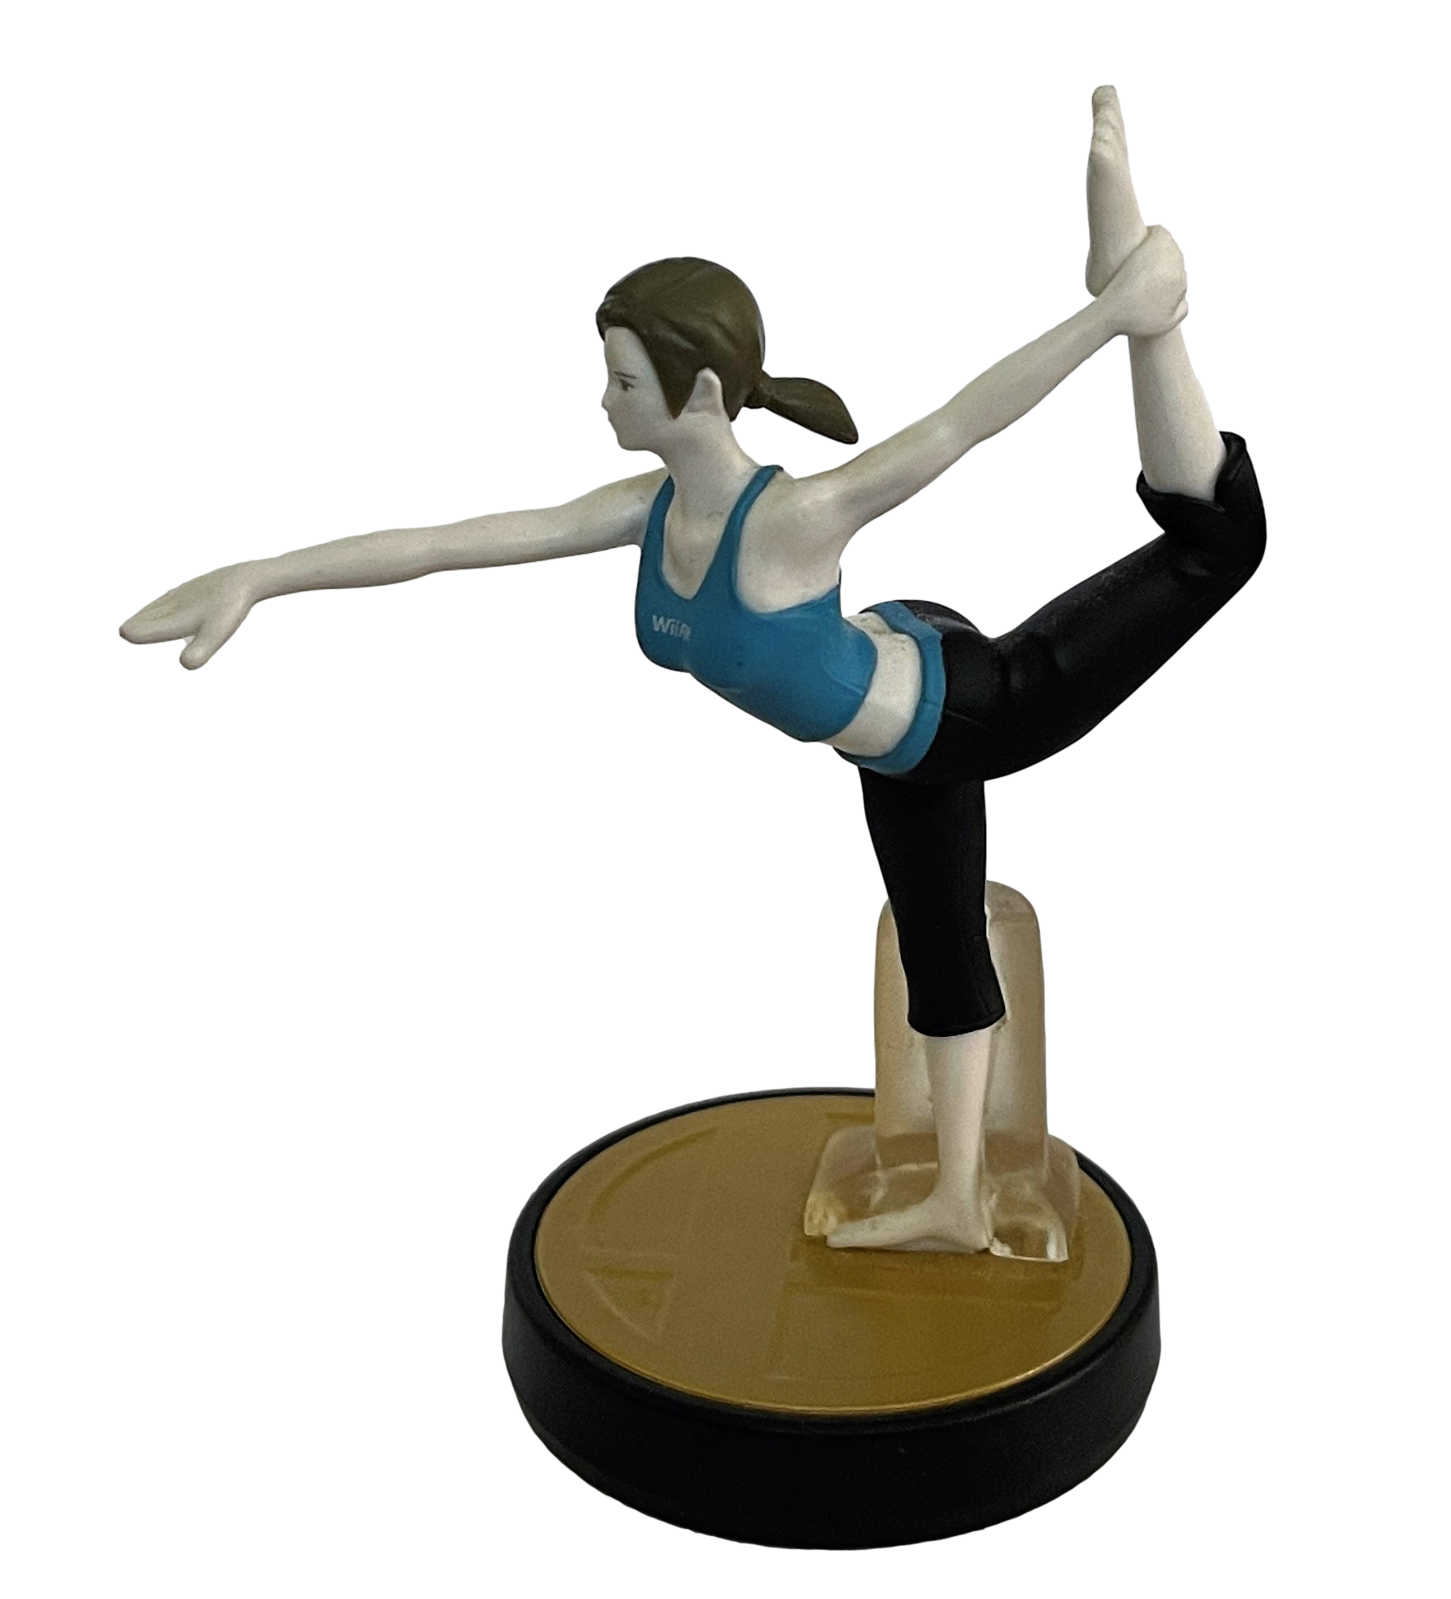 Super Smash Bros Collection N0.8 Wii Fit Trainer Nintendo Amiibo Loose (Preowned)